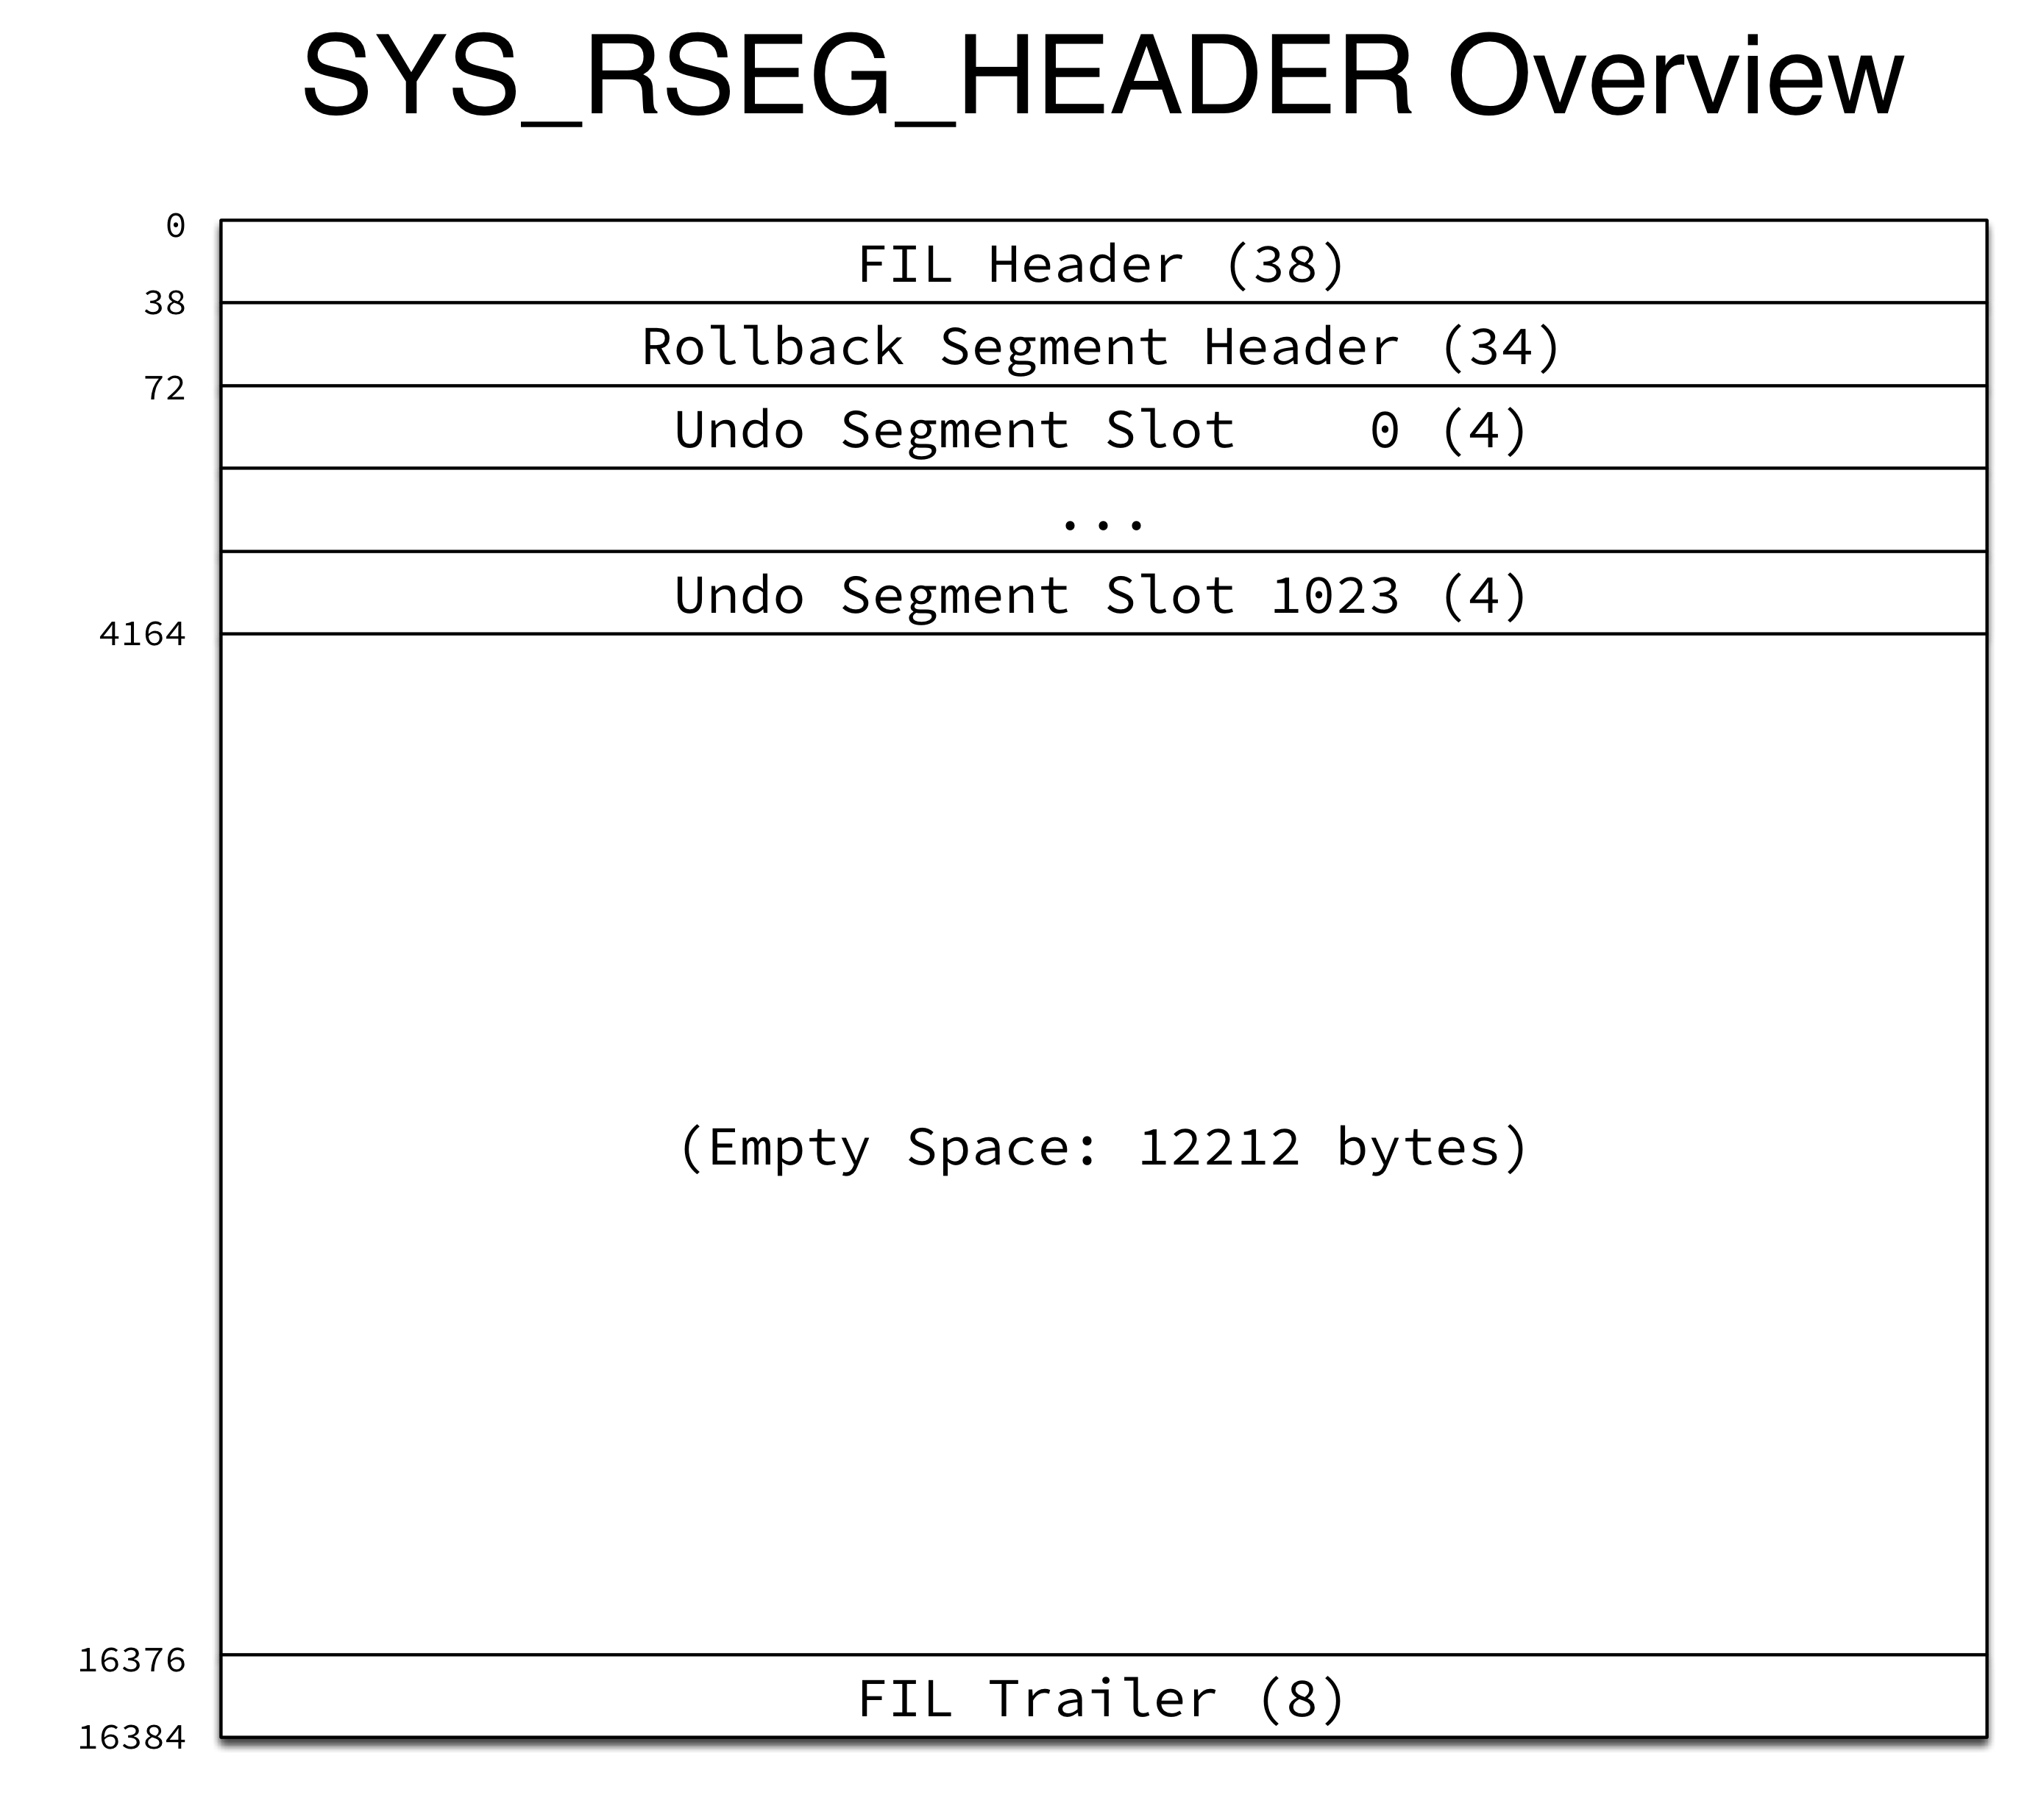 SYS_RSEG_HEADER Overview